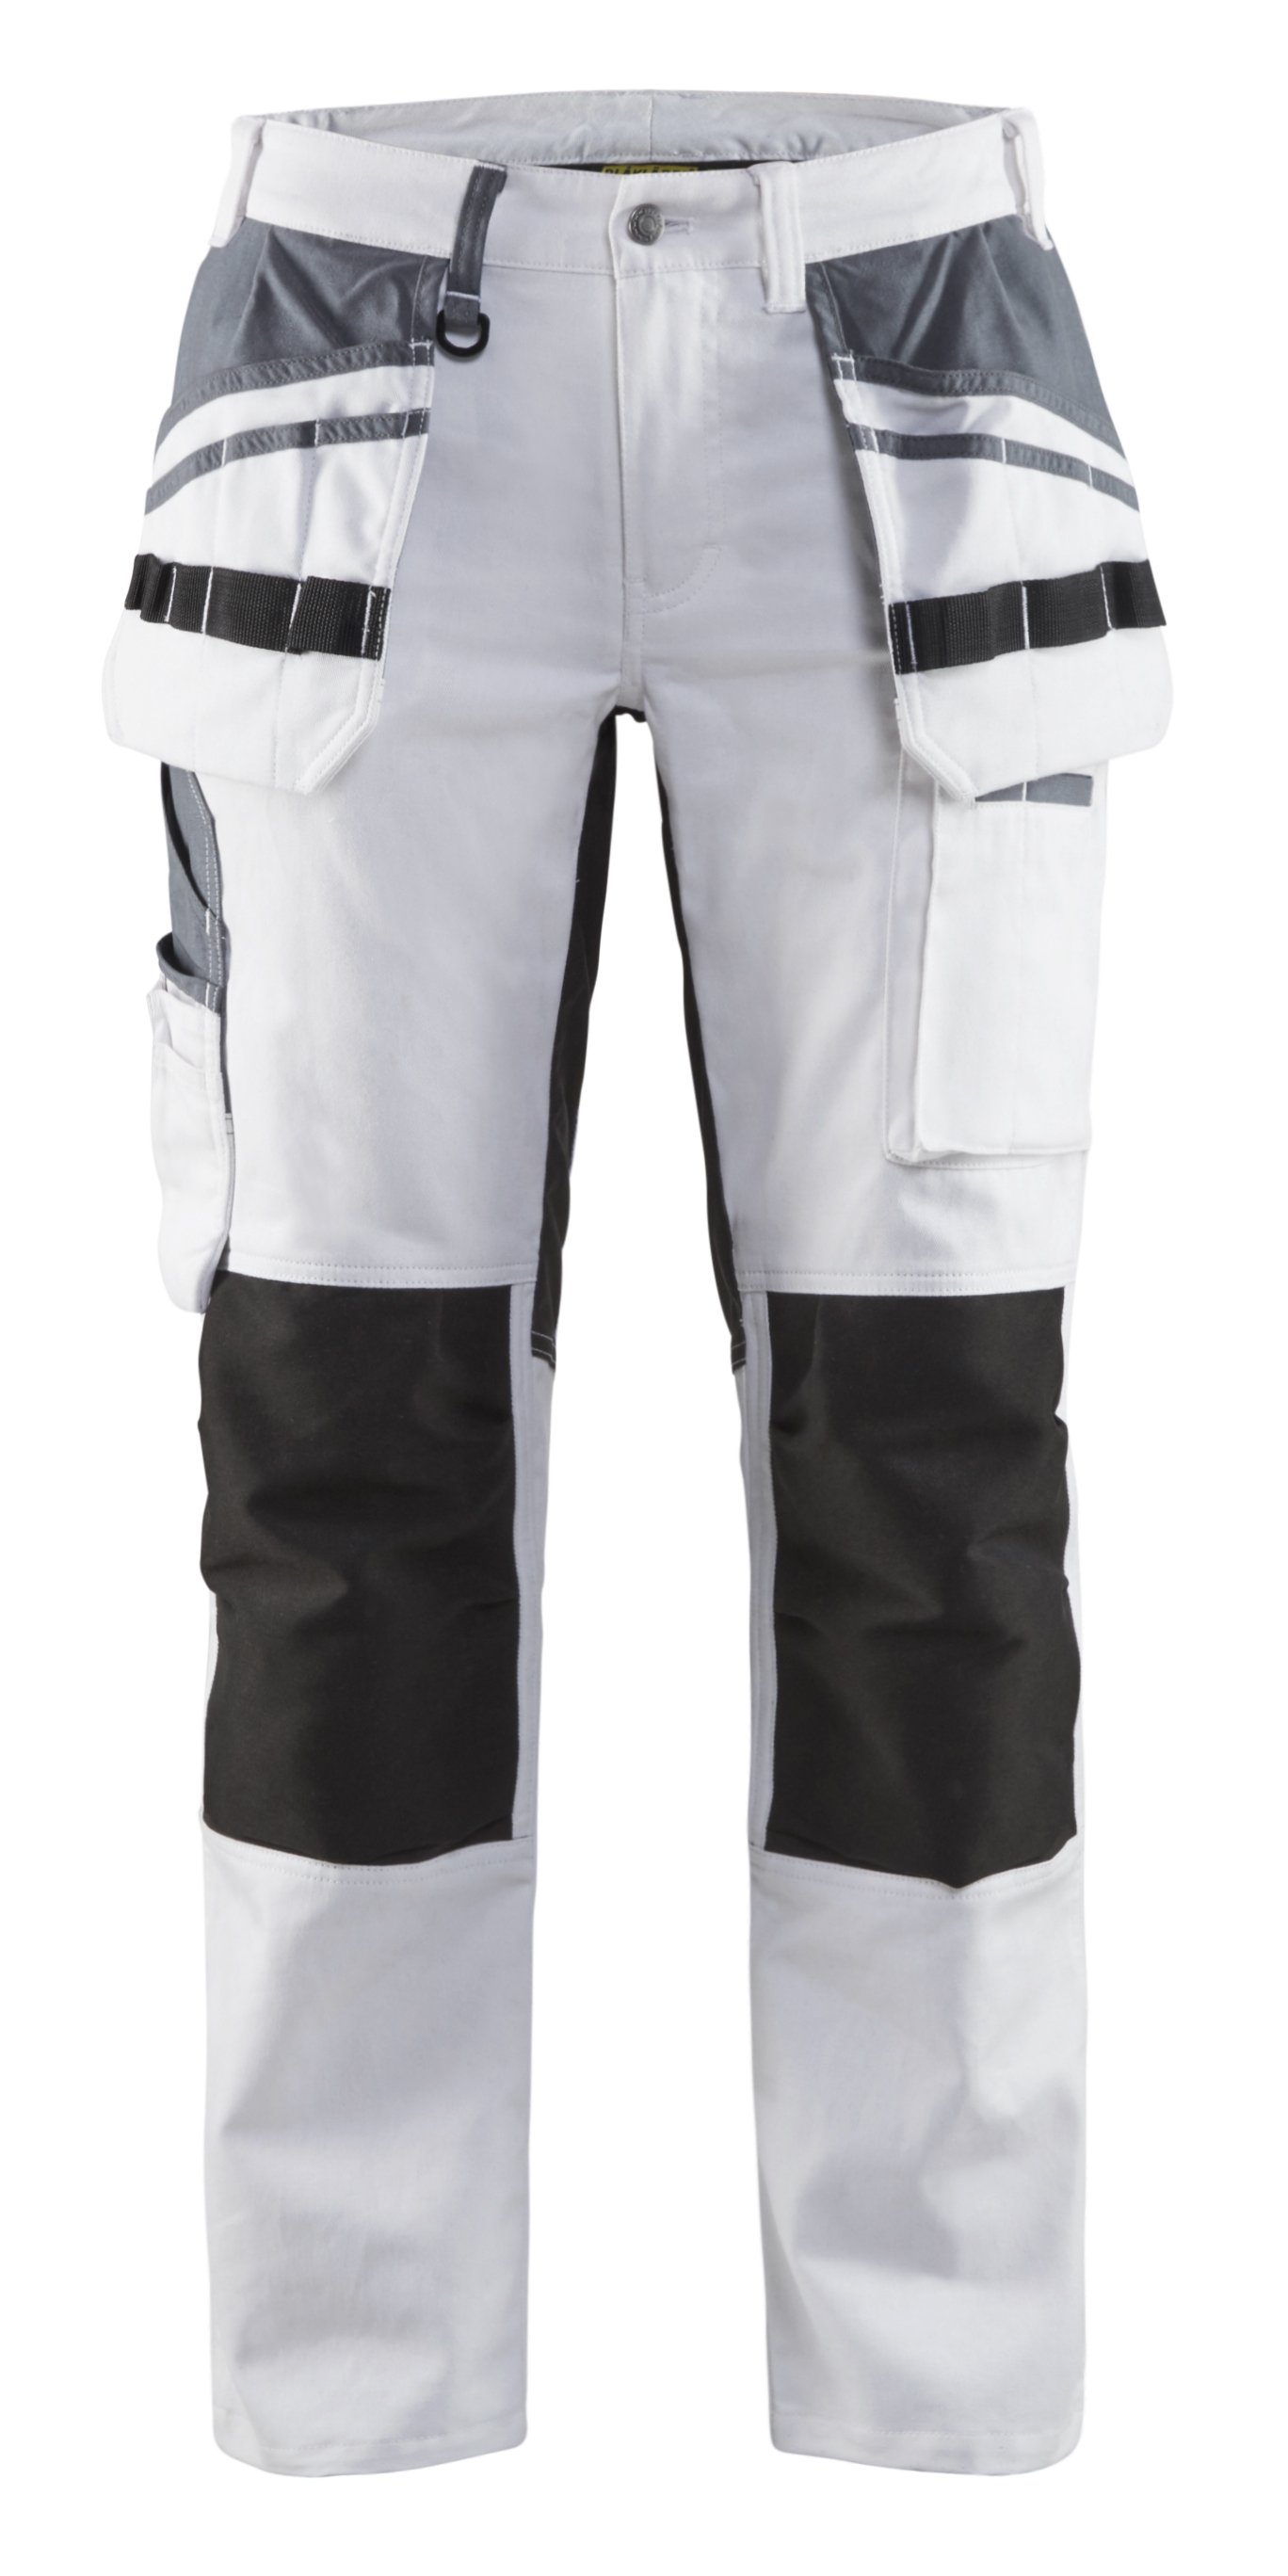 Blaklader Painter Pants Inventory Clearance